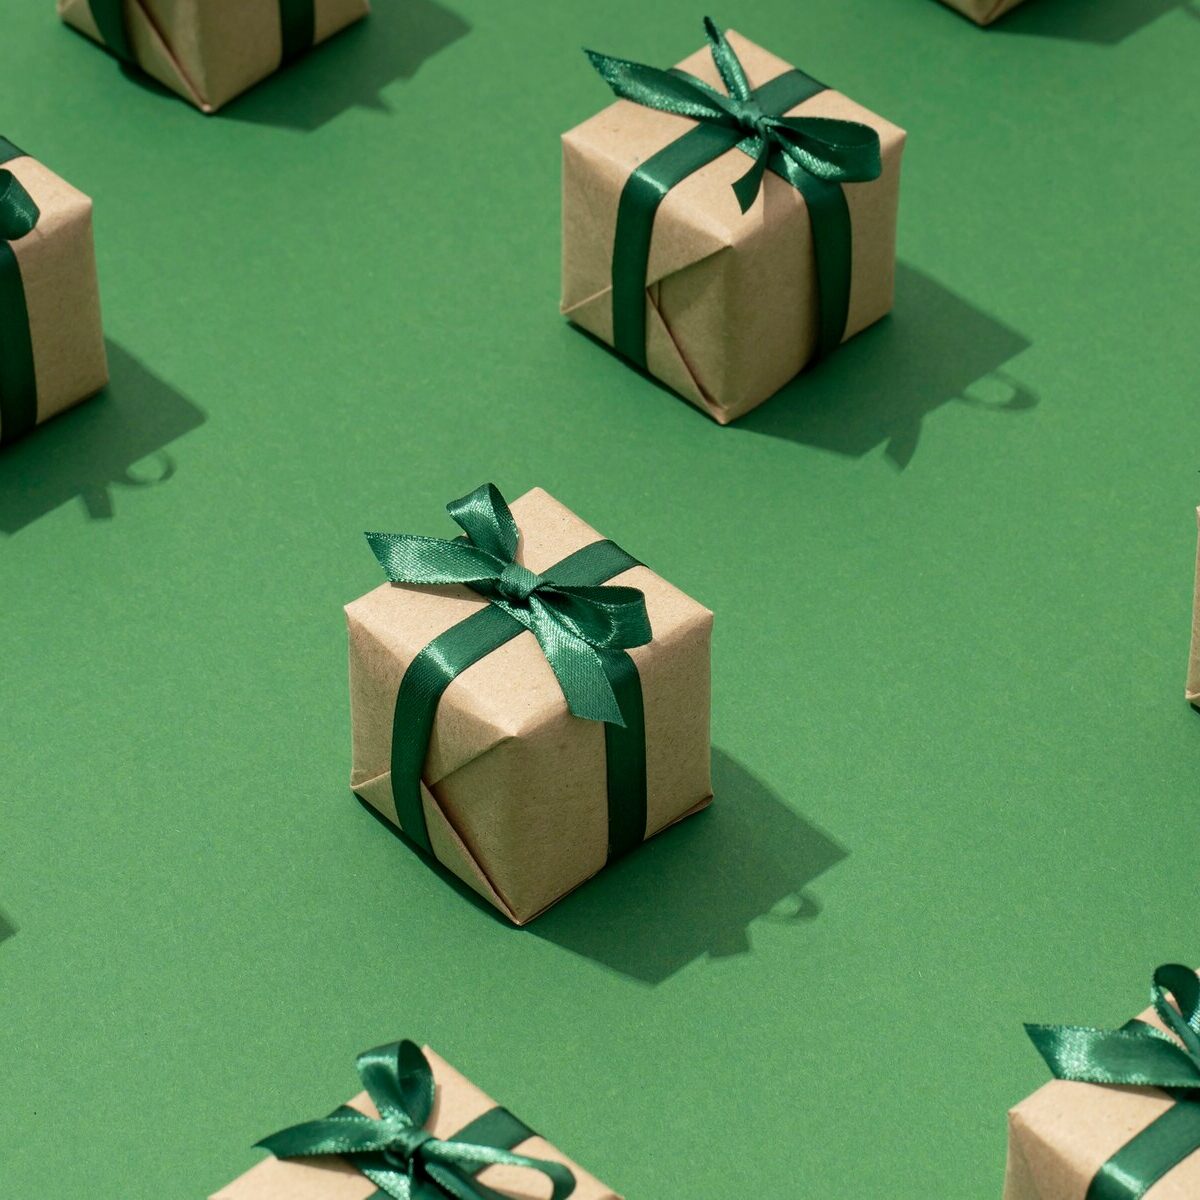 Analyzing Trends: The Most Popular Promotional Gifts of the Year